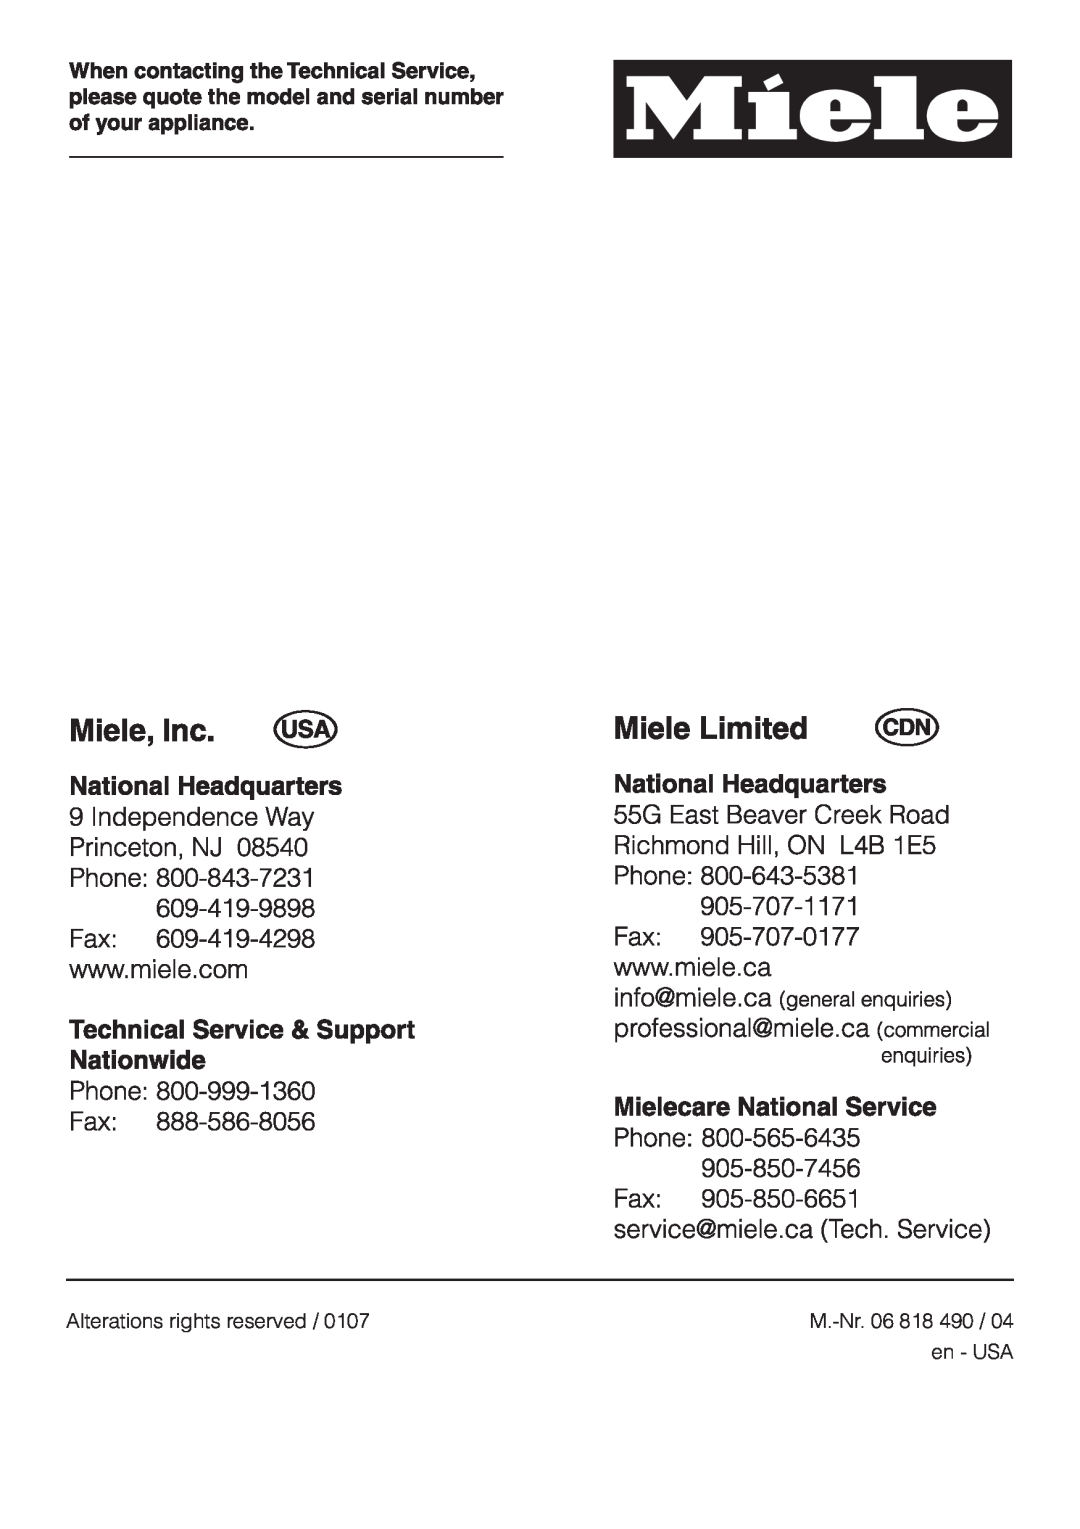 Miele KM 3485, KM 3474, KM 3484 installation instructions Alterations rights reserved, en - USA, M.-Nr 